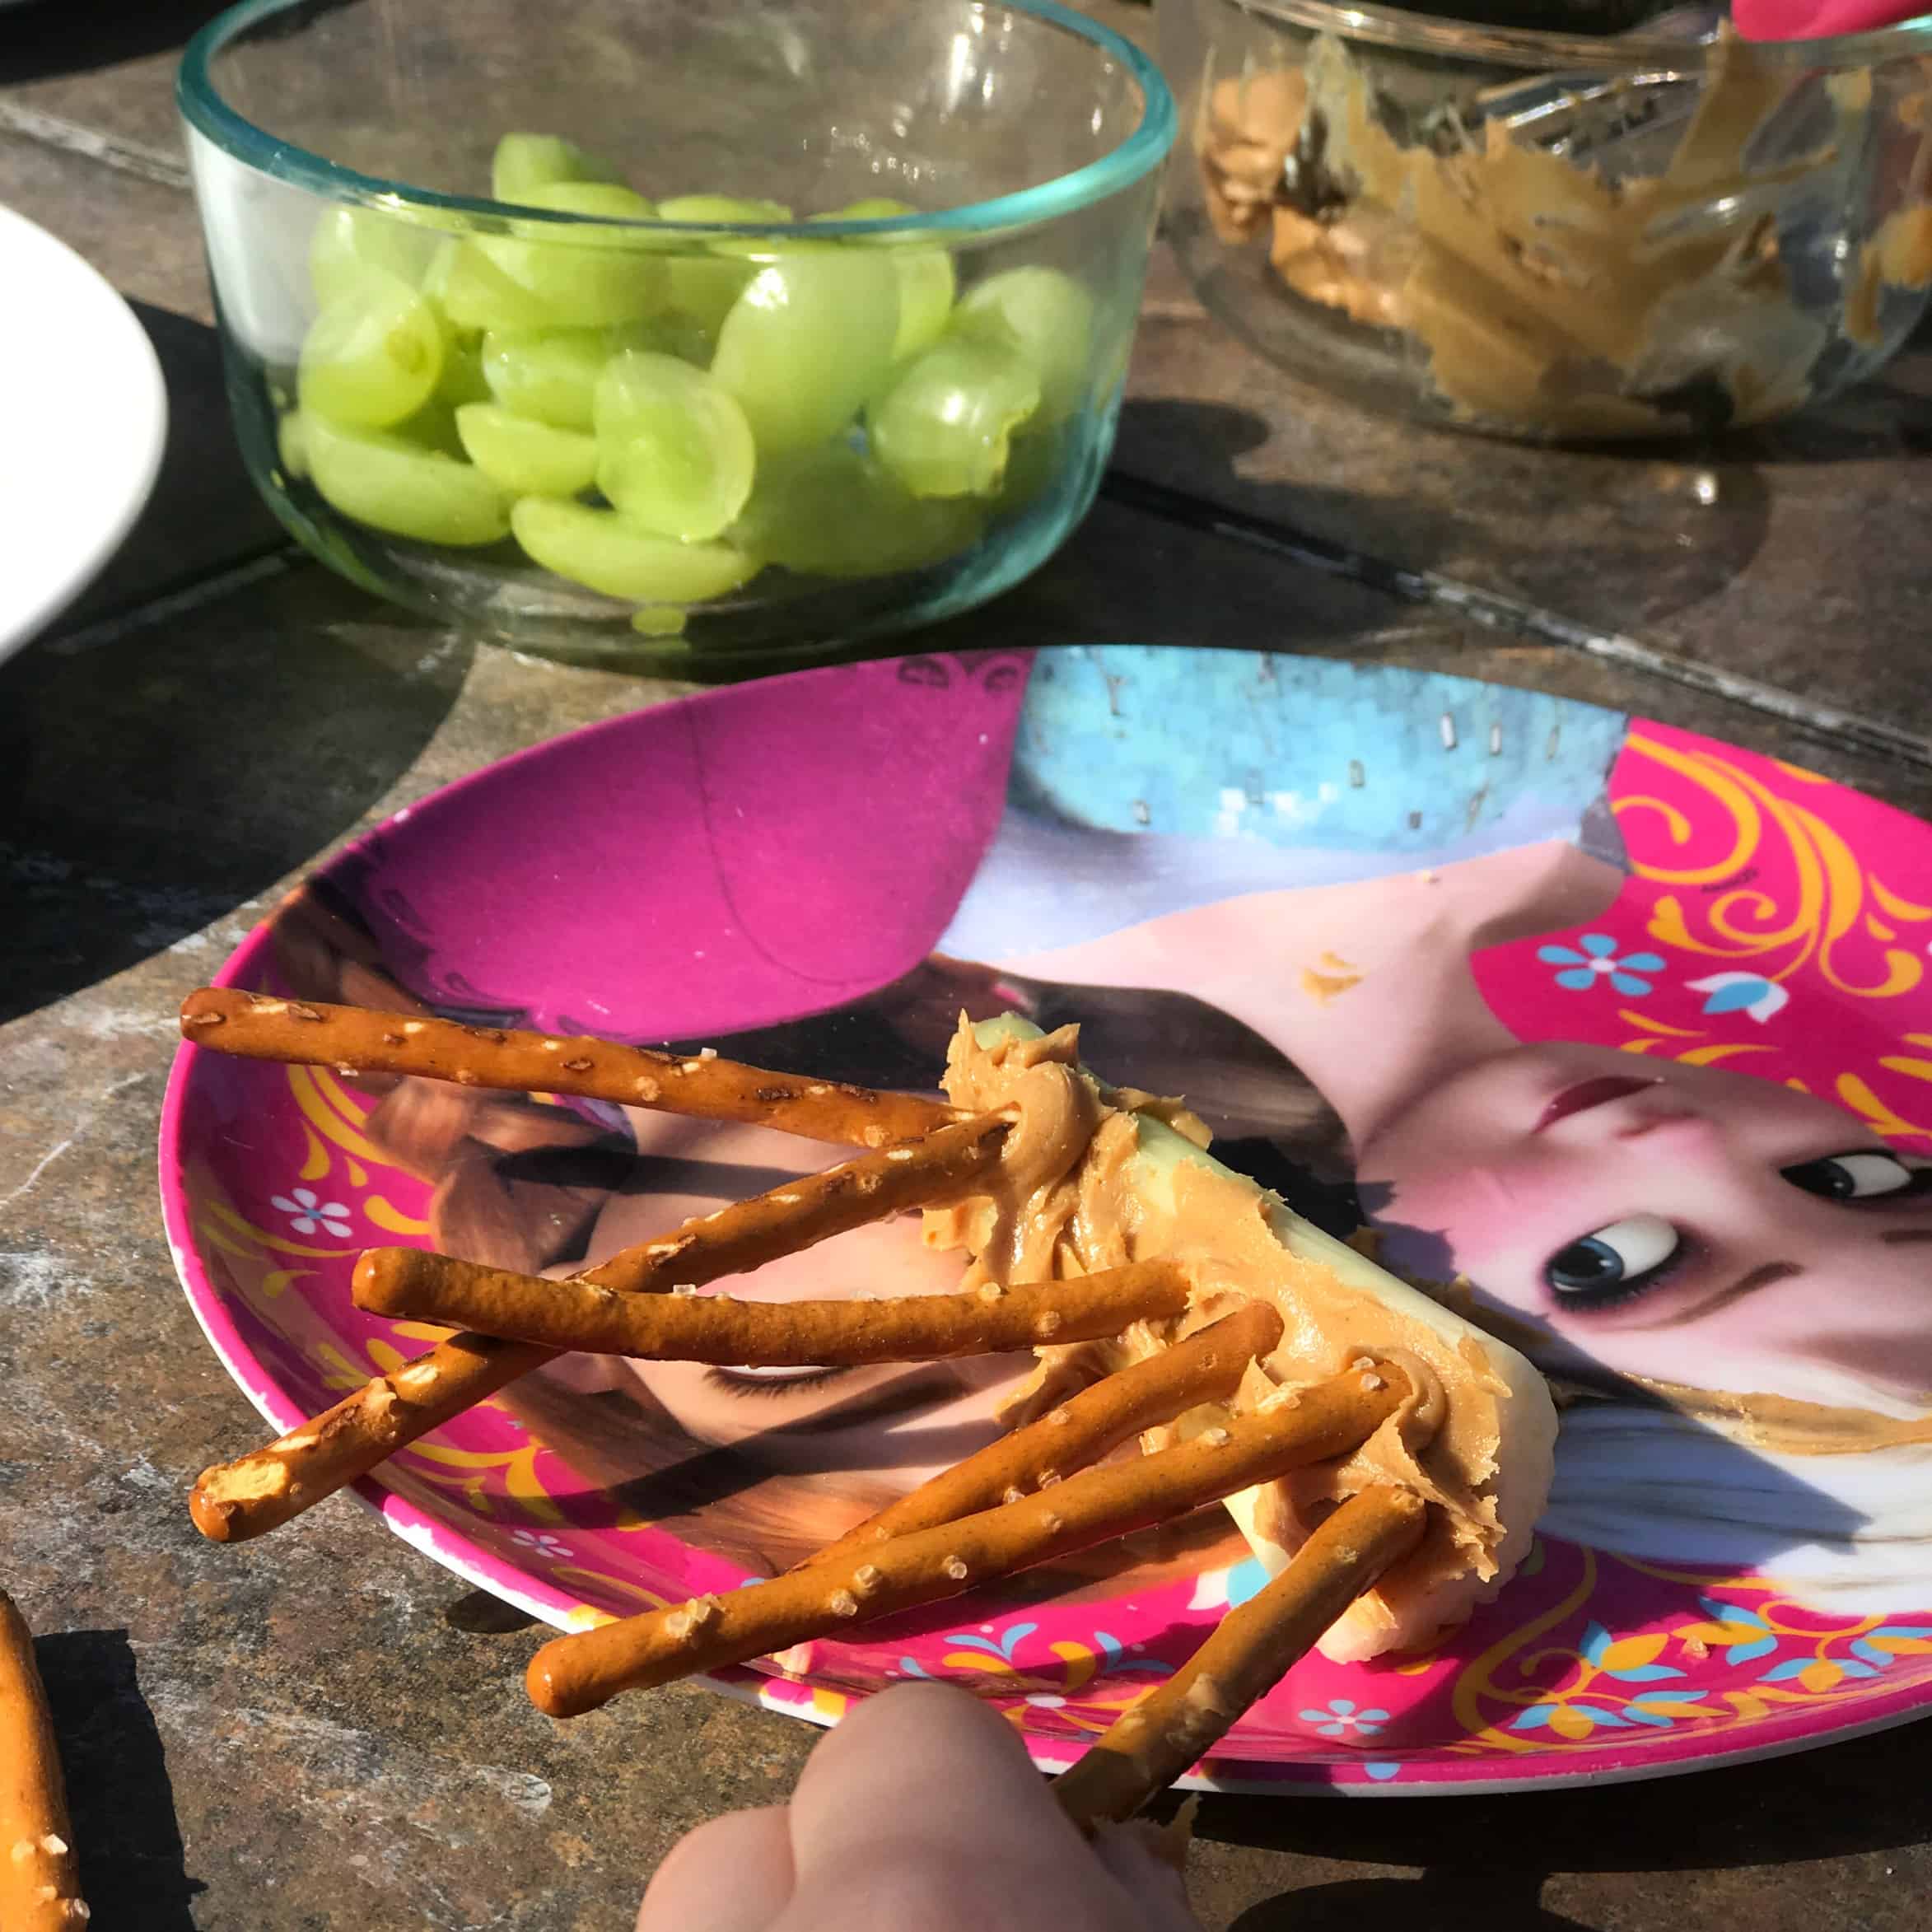 This healthy forest tree snack is perfect for kids to make after reading the book, The Gruffalo. They can make their own interpretation of the snack!